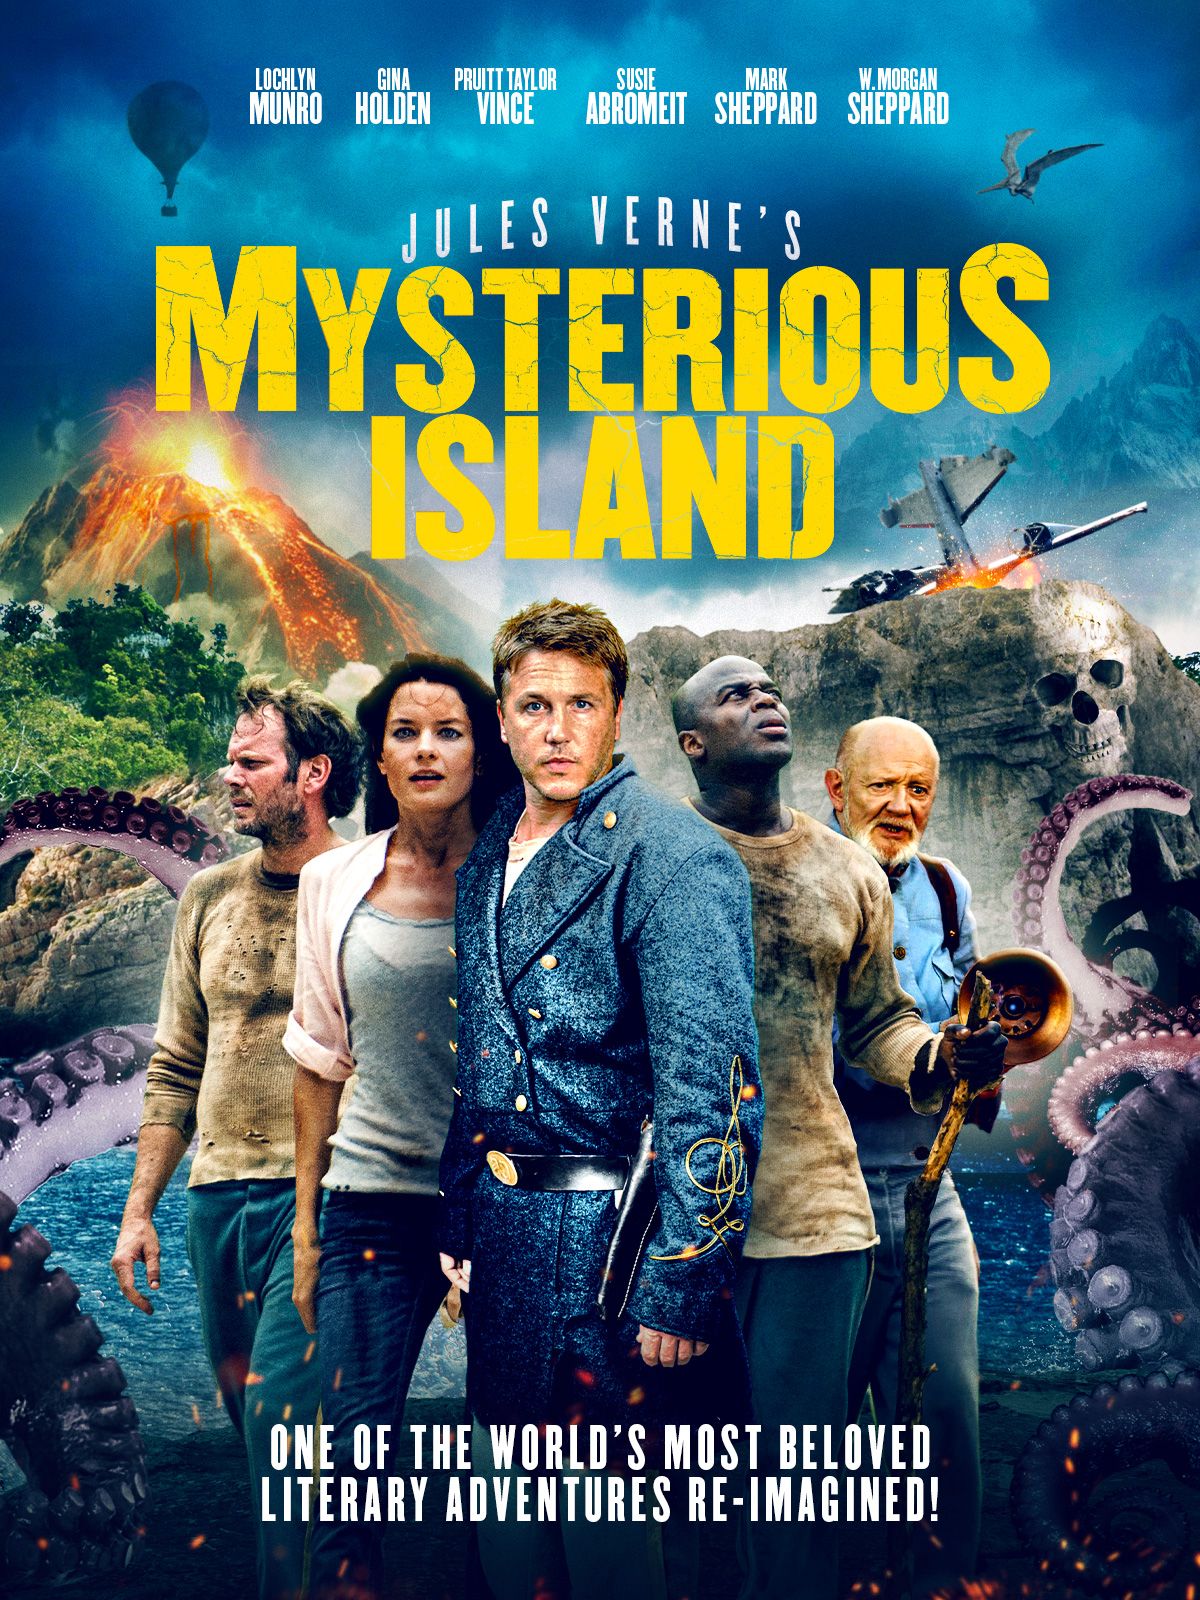 Keyart for the movie Jules Verne’s Mysterious Island